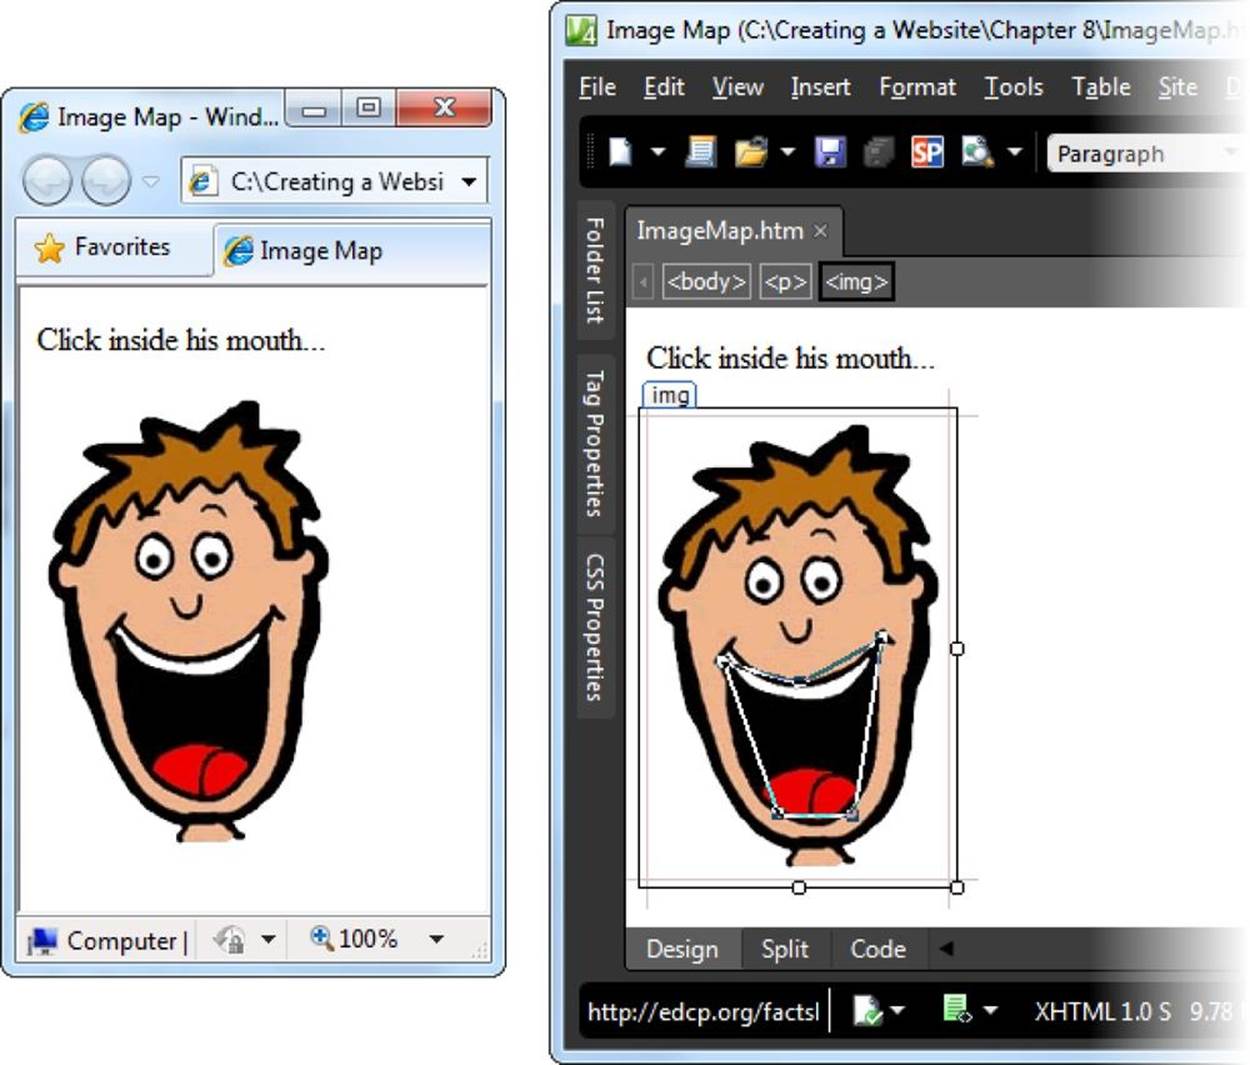 Left: An ordinary picture, courtesy of the <img> element.Right: An irregularly shaped region inside the mouth becomes a hotspot—a clickable region that takes visitors to another page. In this example, you can see the hotspot because it’s being edited in Expression Web. Ordinarily, visitors can’t see hotspots when they look at a picture in a browser